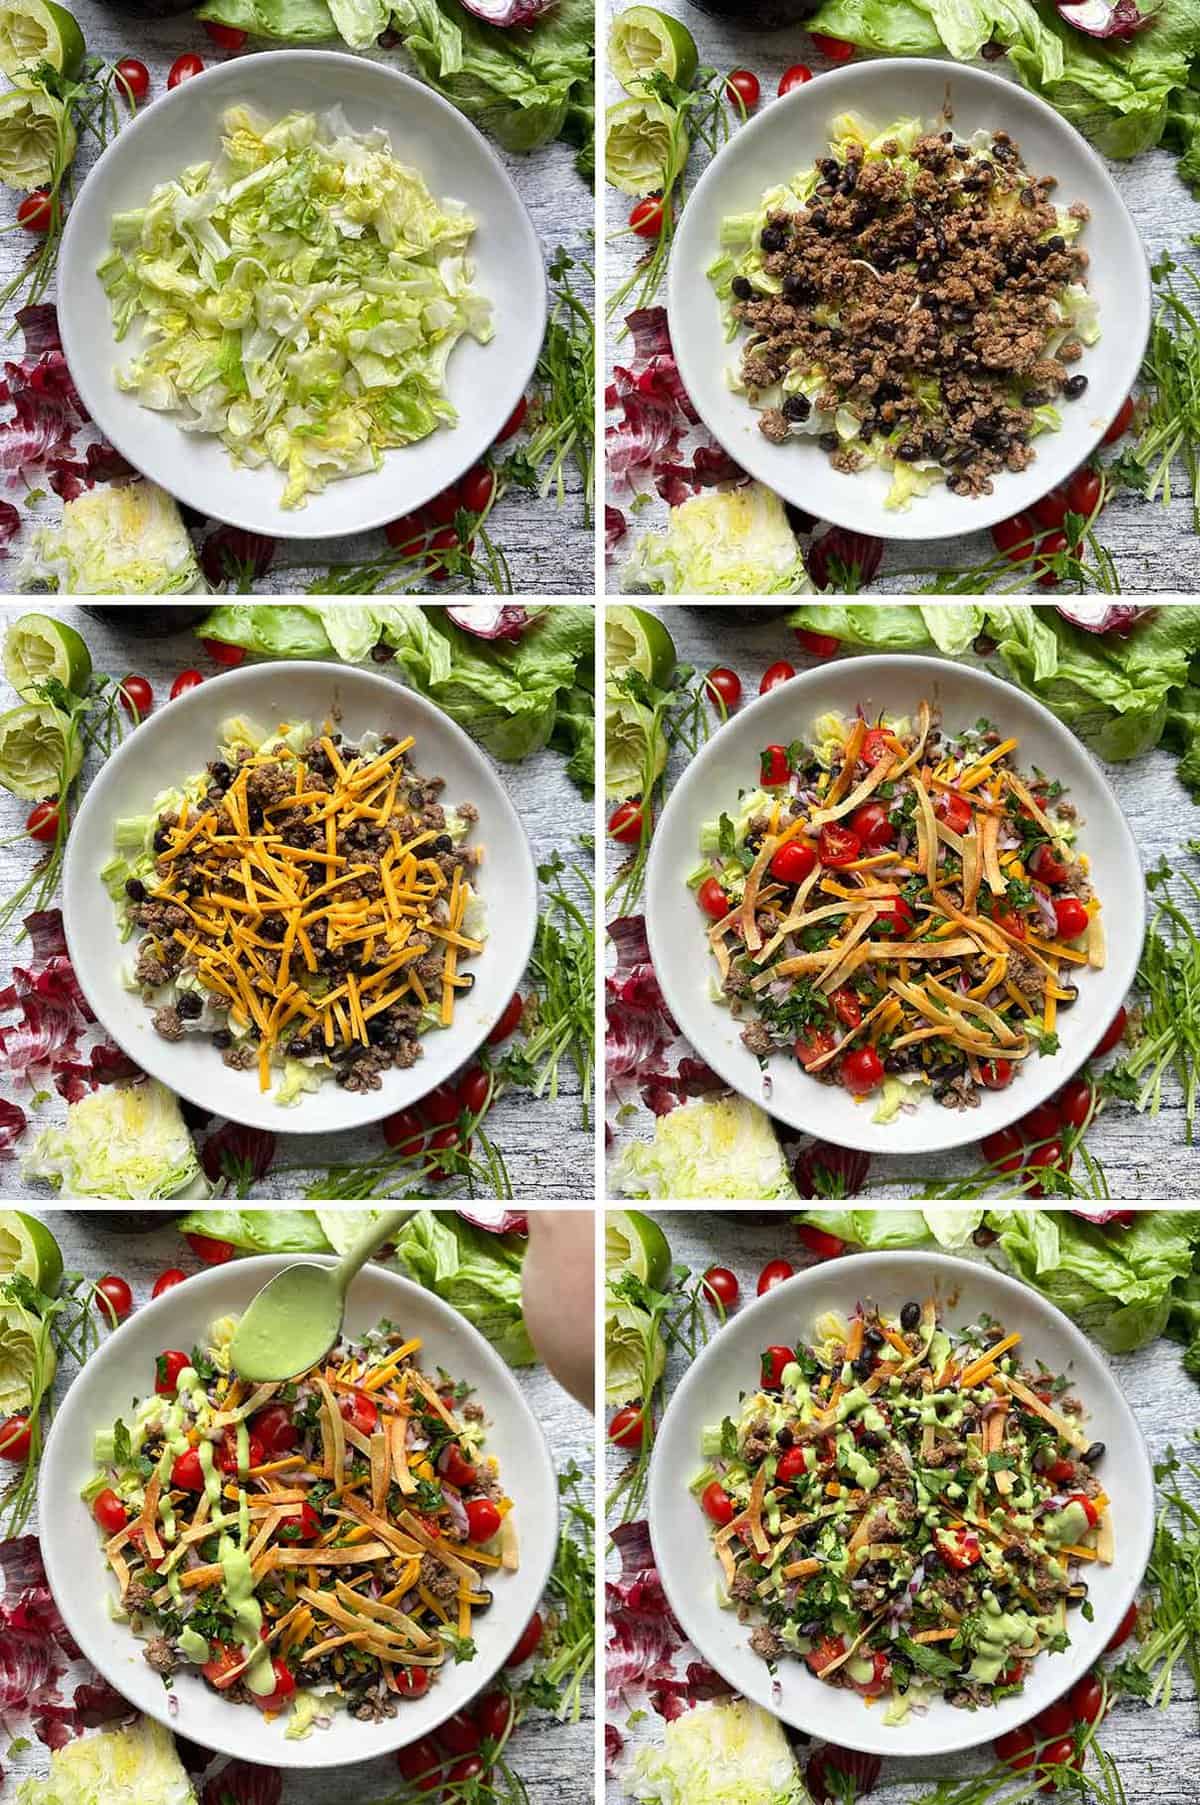 Process collage showing layering the ingredients for taco salad in a bowl.